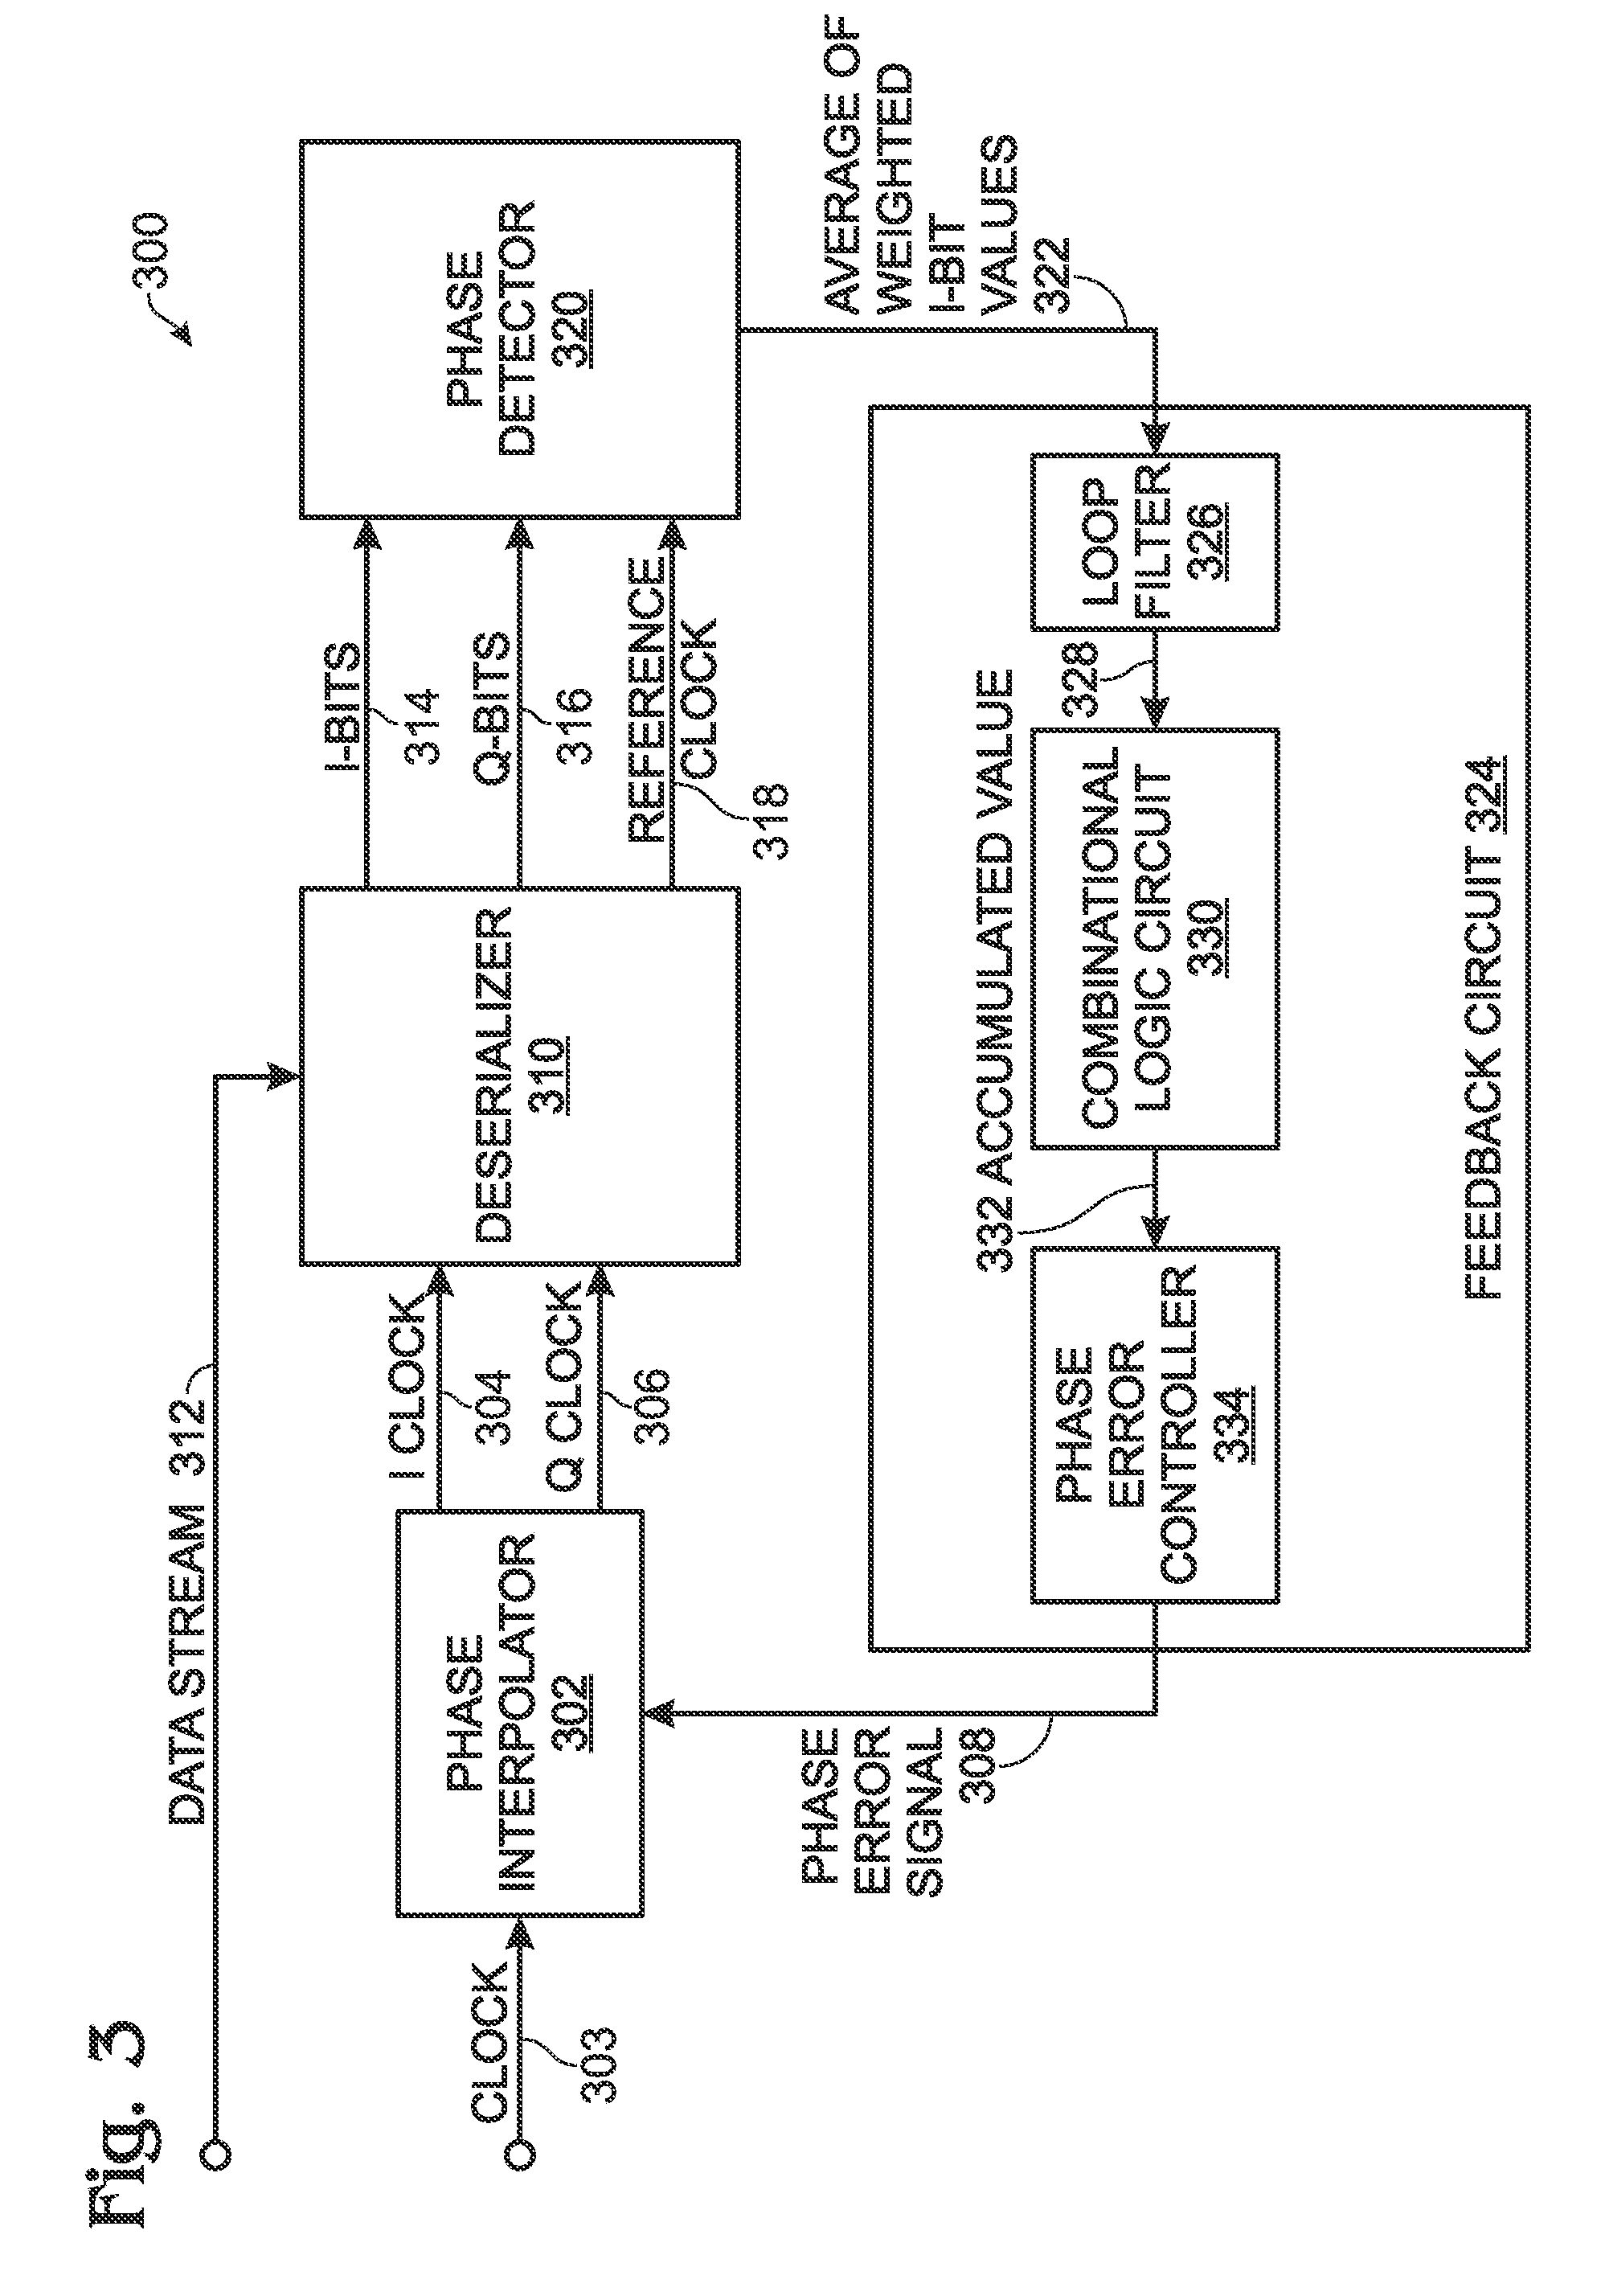 Clock and Data Recovery Loop with ISI Pattern-Weighted Early-Late Phase Detection